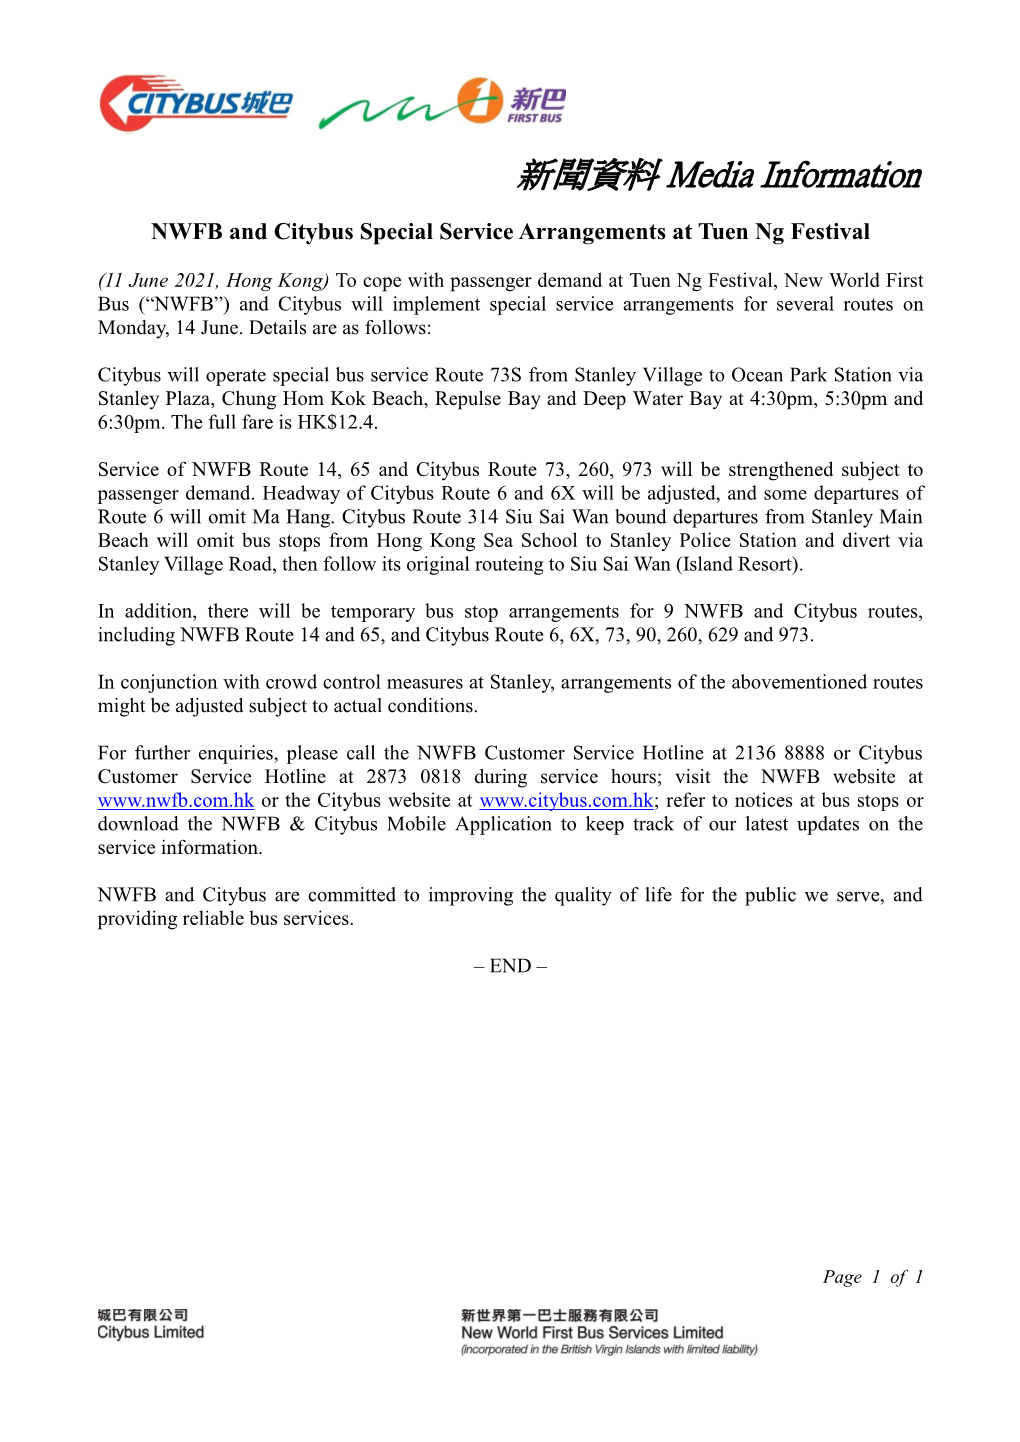 NWFB and Citybus Special Service Arrangements at Tuen Ng Festival